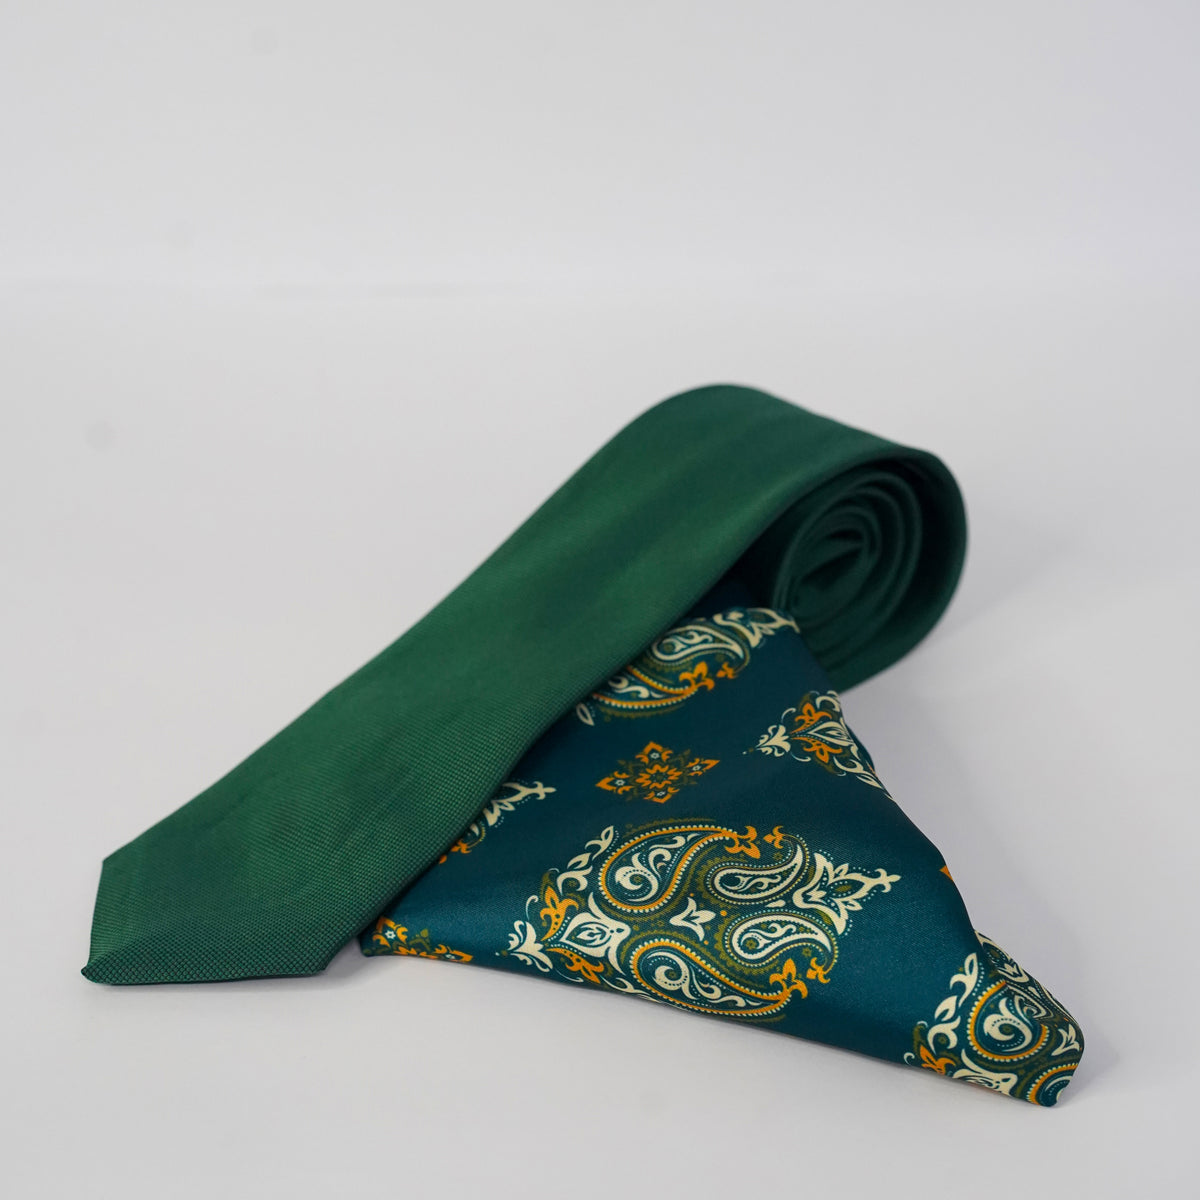 GREEN & YELLOW MYSTERY POCKET SQUARE AND TIE SET